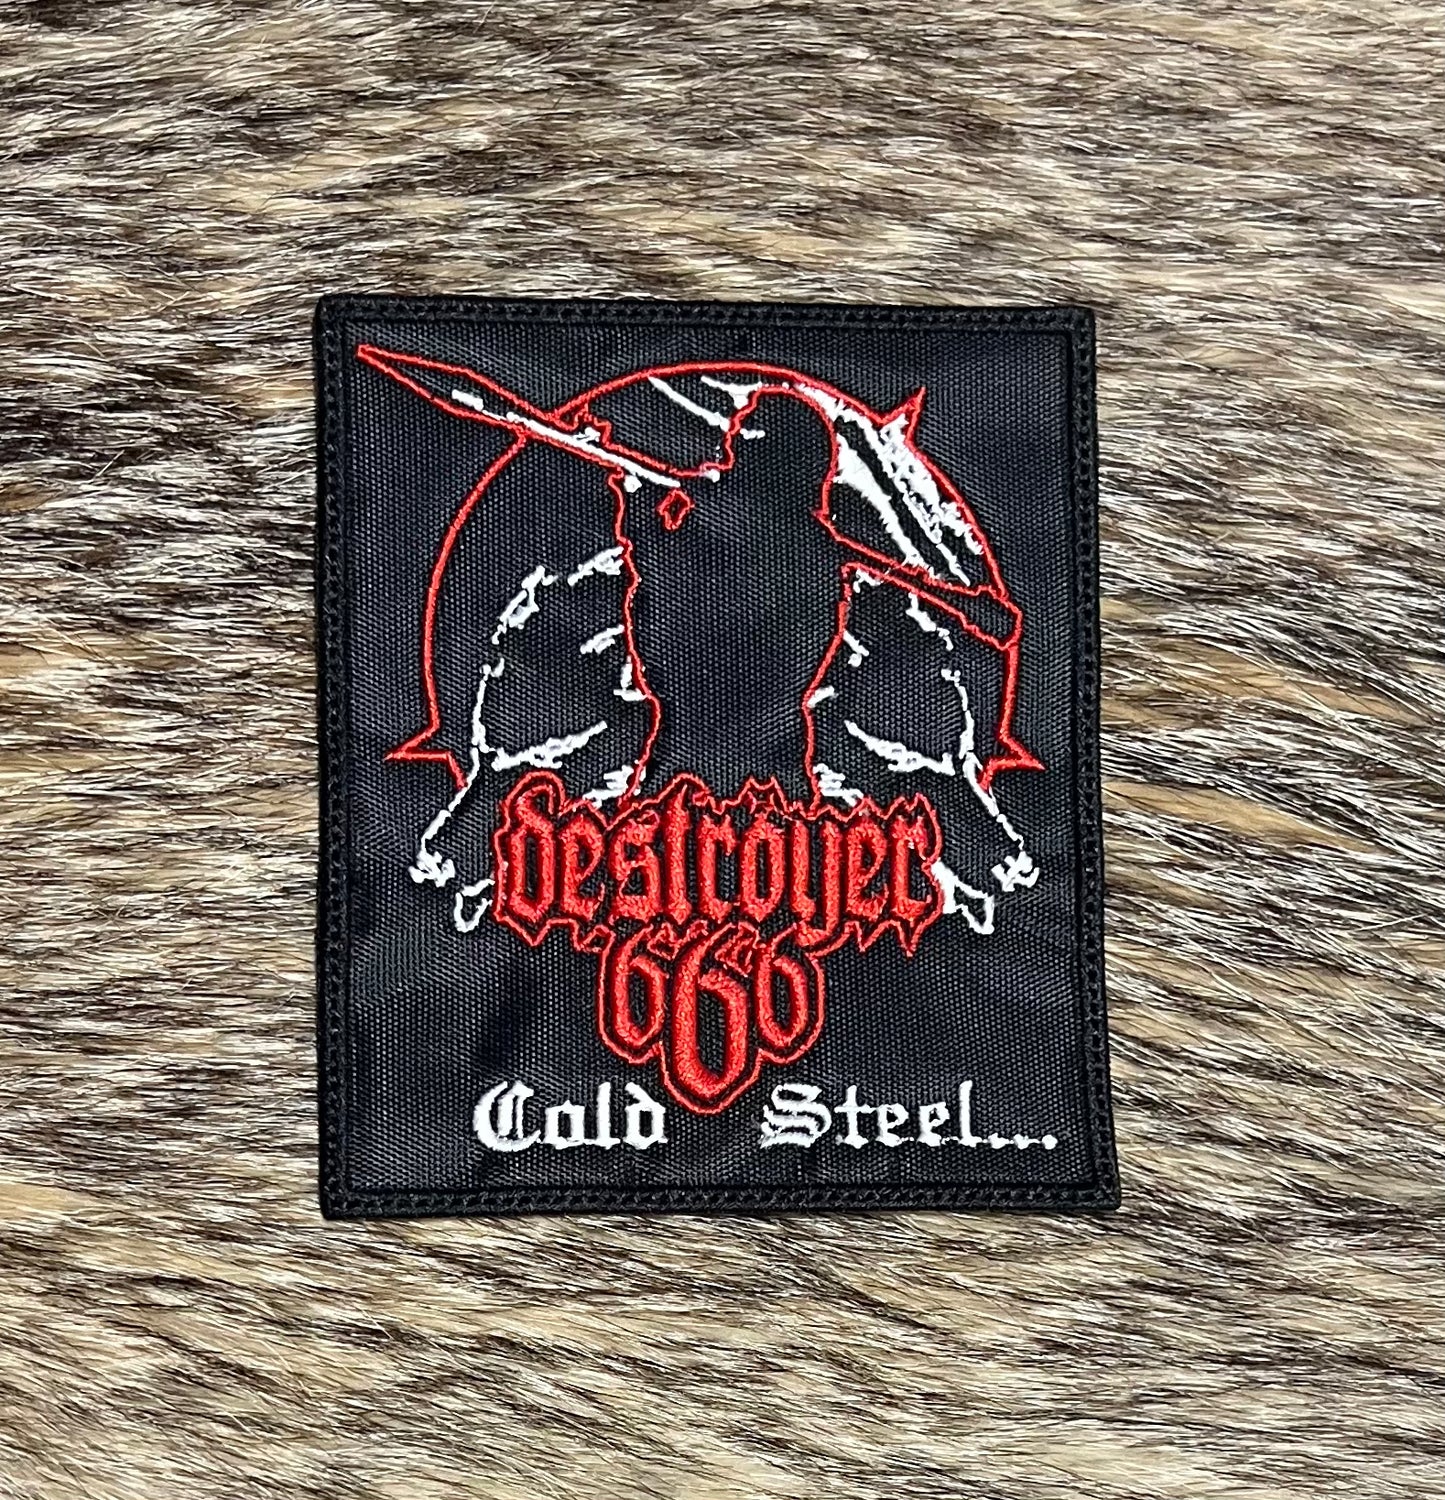 Destroyer 666 - Cold Steel Patch